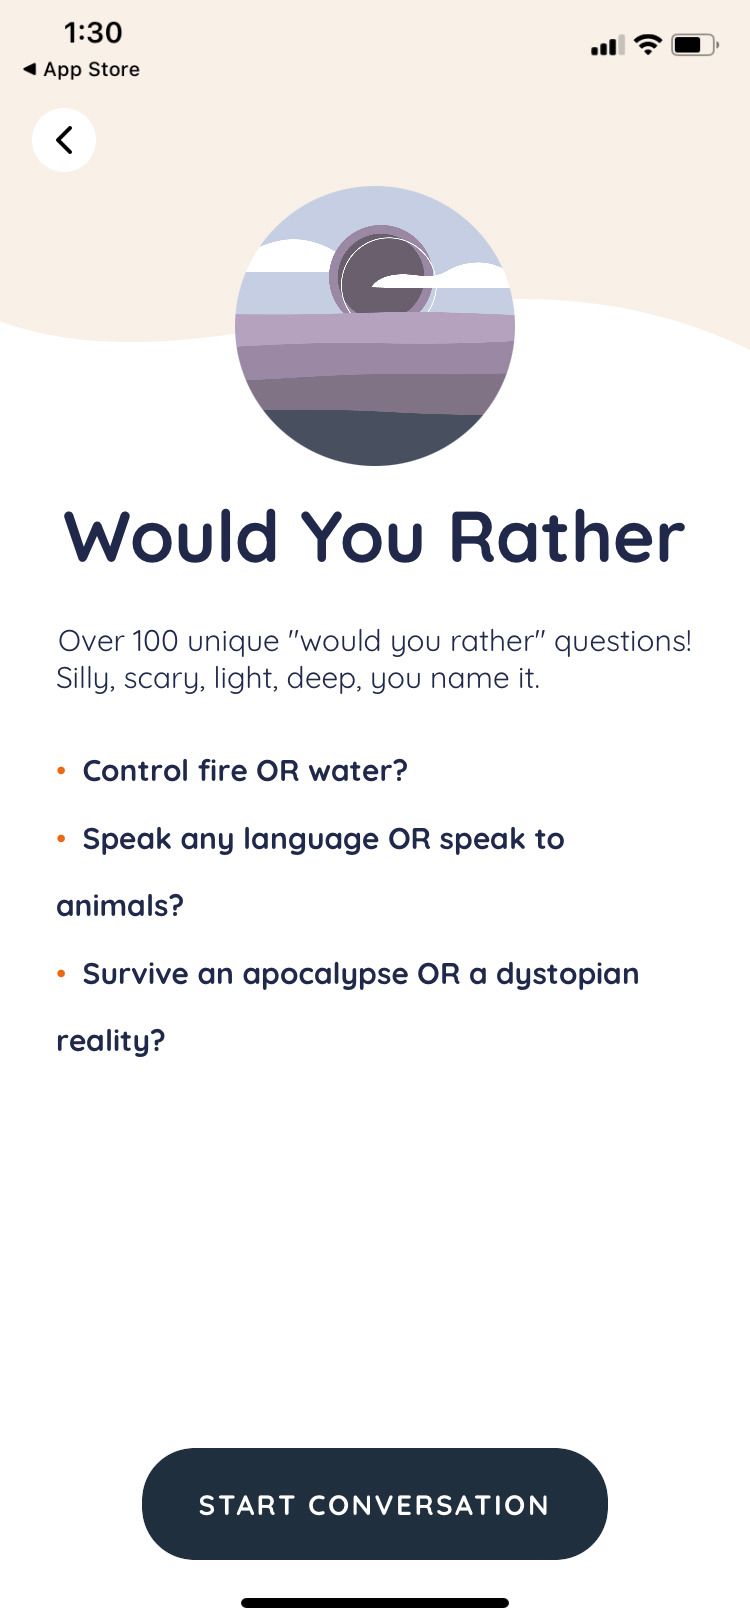 Gather app would you rather questions